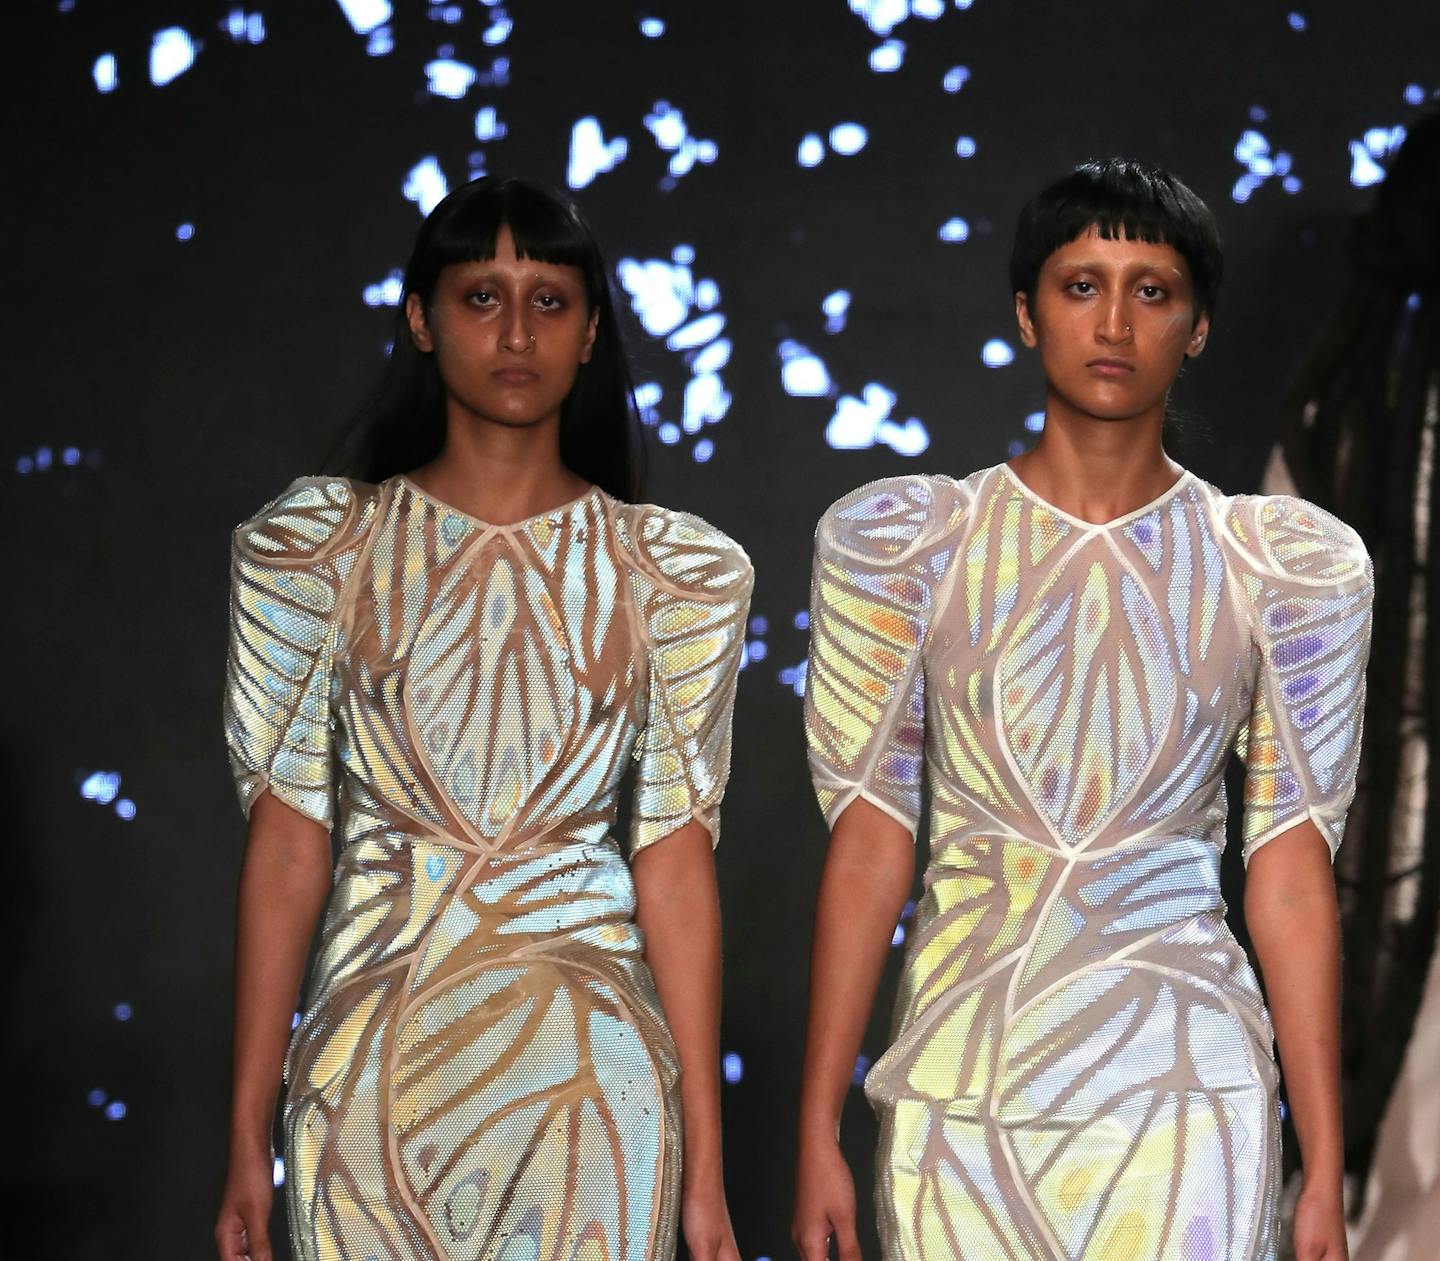 New style of 3-D-printed fashion hits New York runway